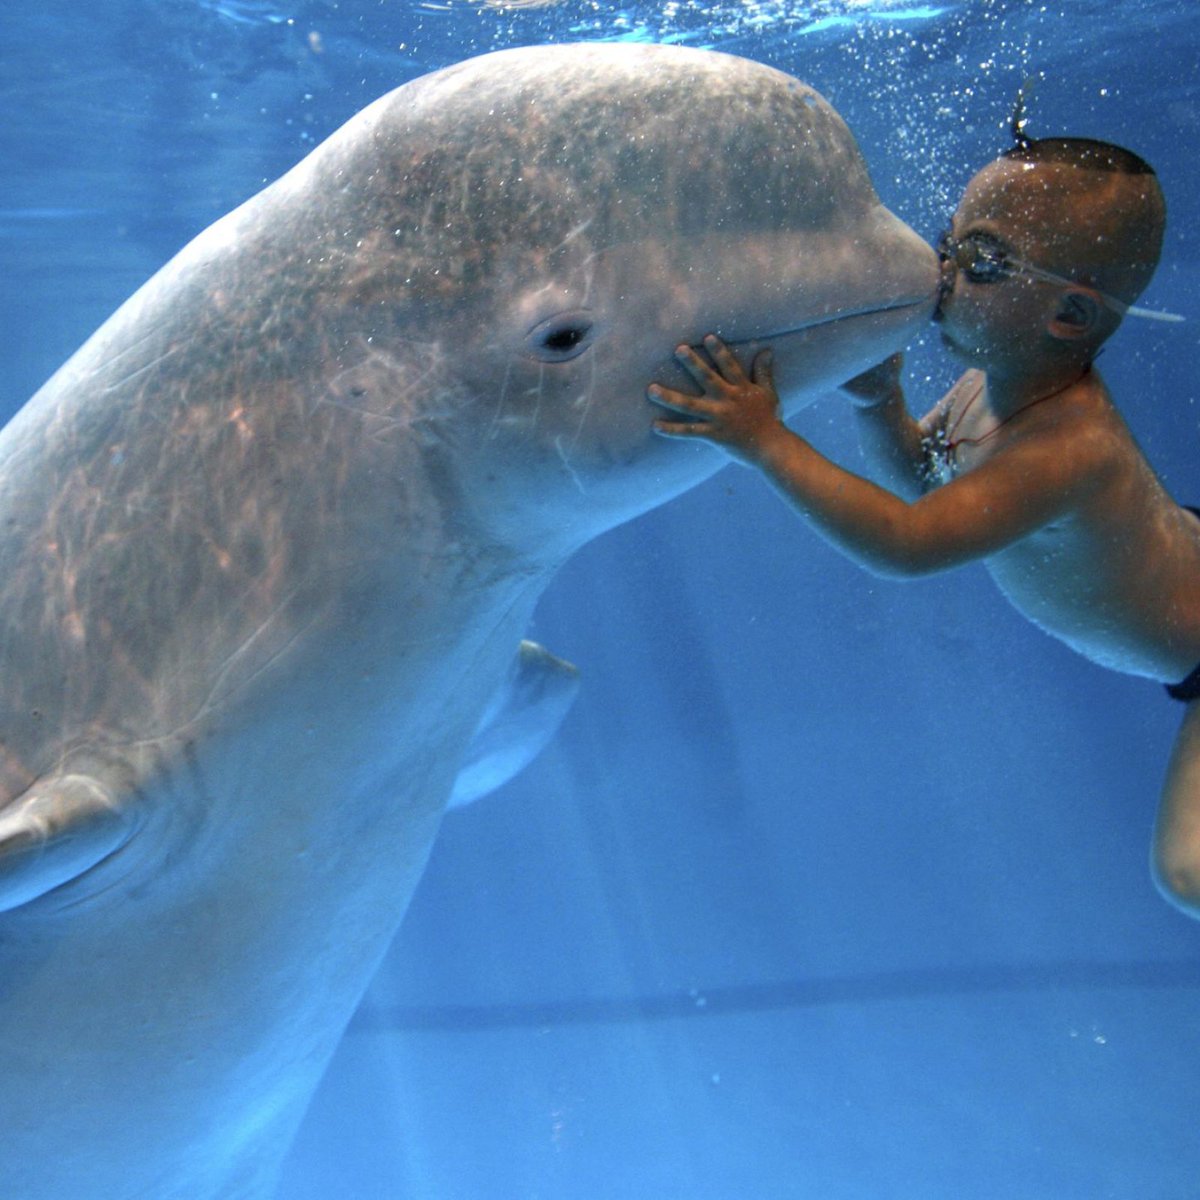 Sentience is everywhere in the animal kingdom. For example, Beluga Whales. - Mimicking Human Speech: There have been documented instances where beluga whales in captivity have imitated human speech sounds, suggesting a capacity for sophisticated auditory learning and a desire